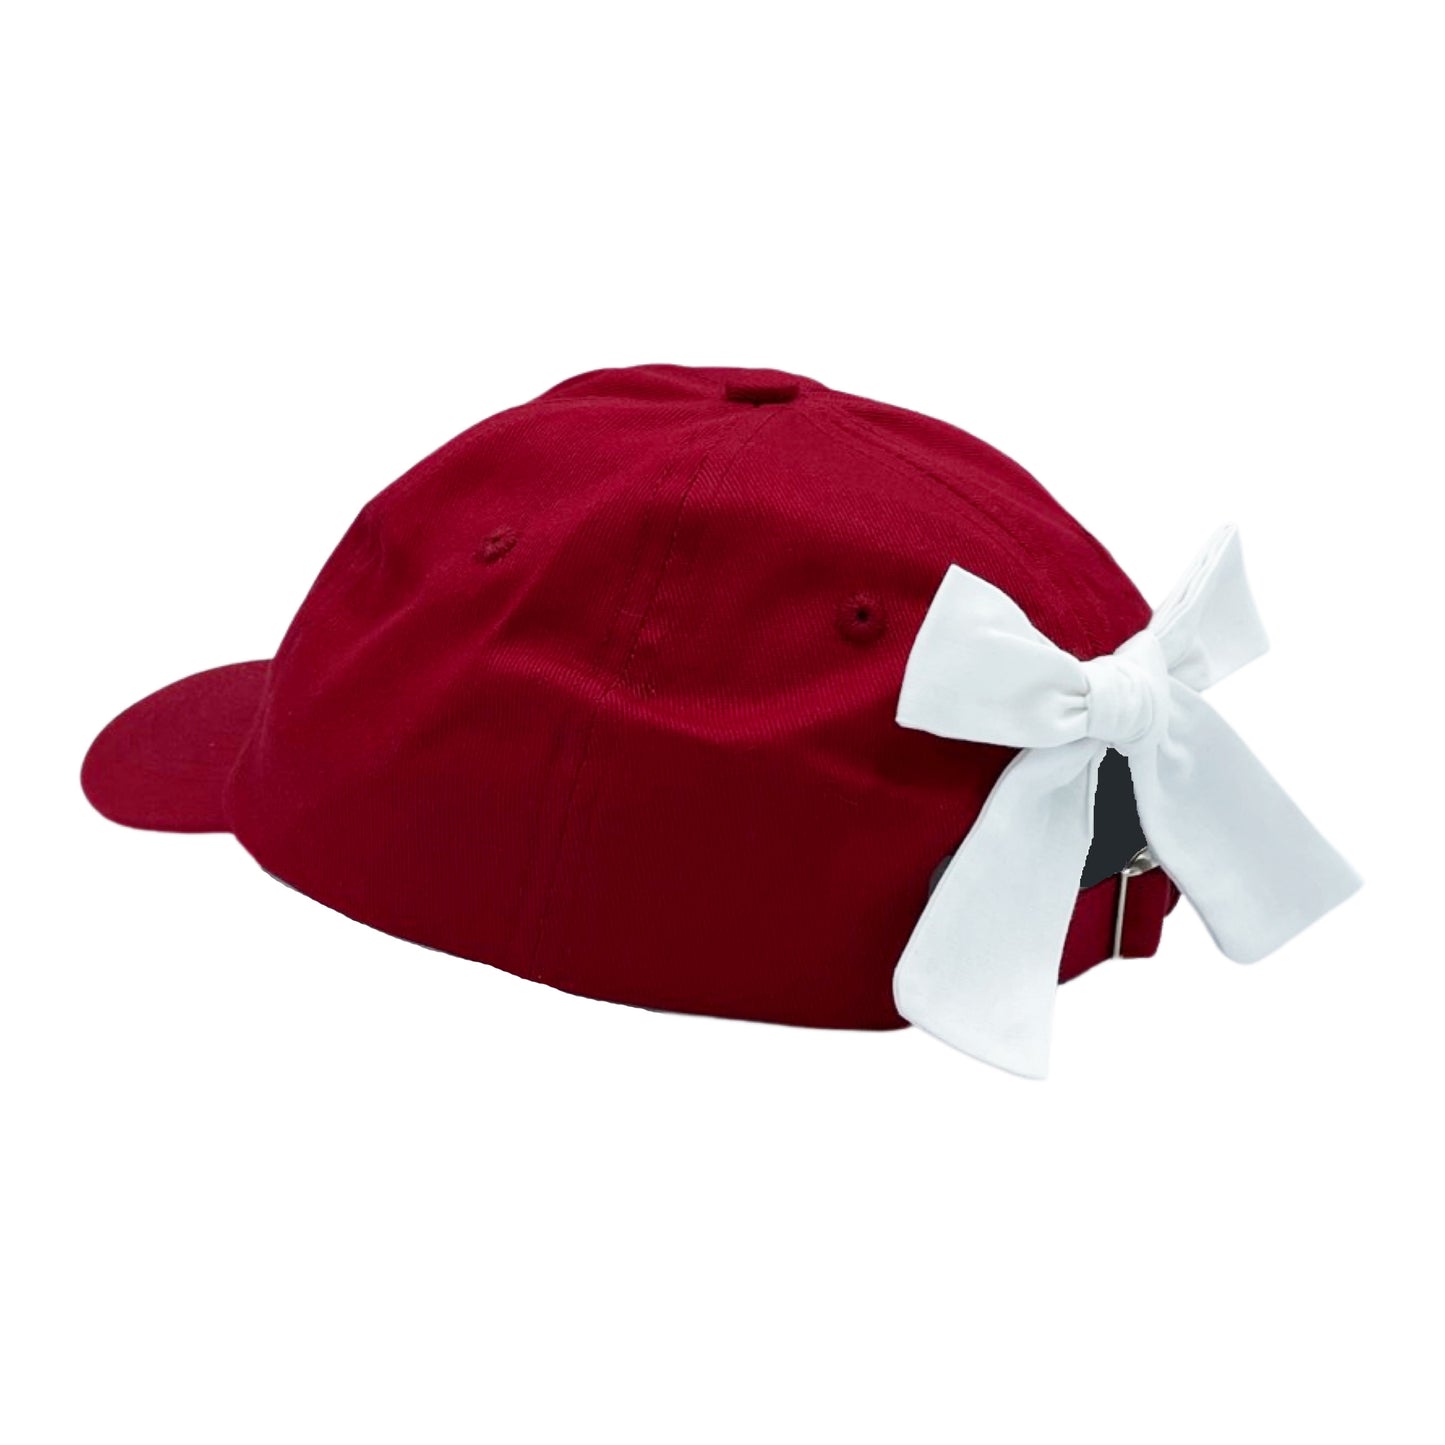 Customizable Bow Baseball Hat in Ruby Red (Women)